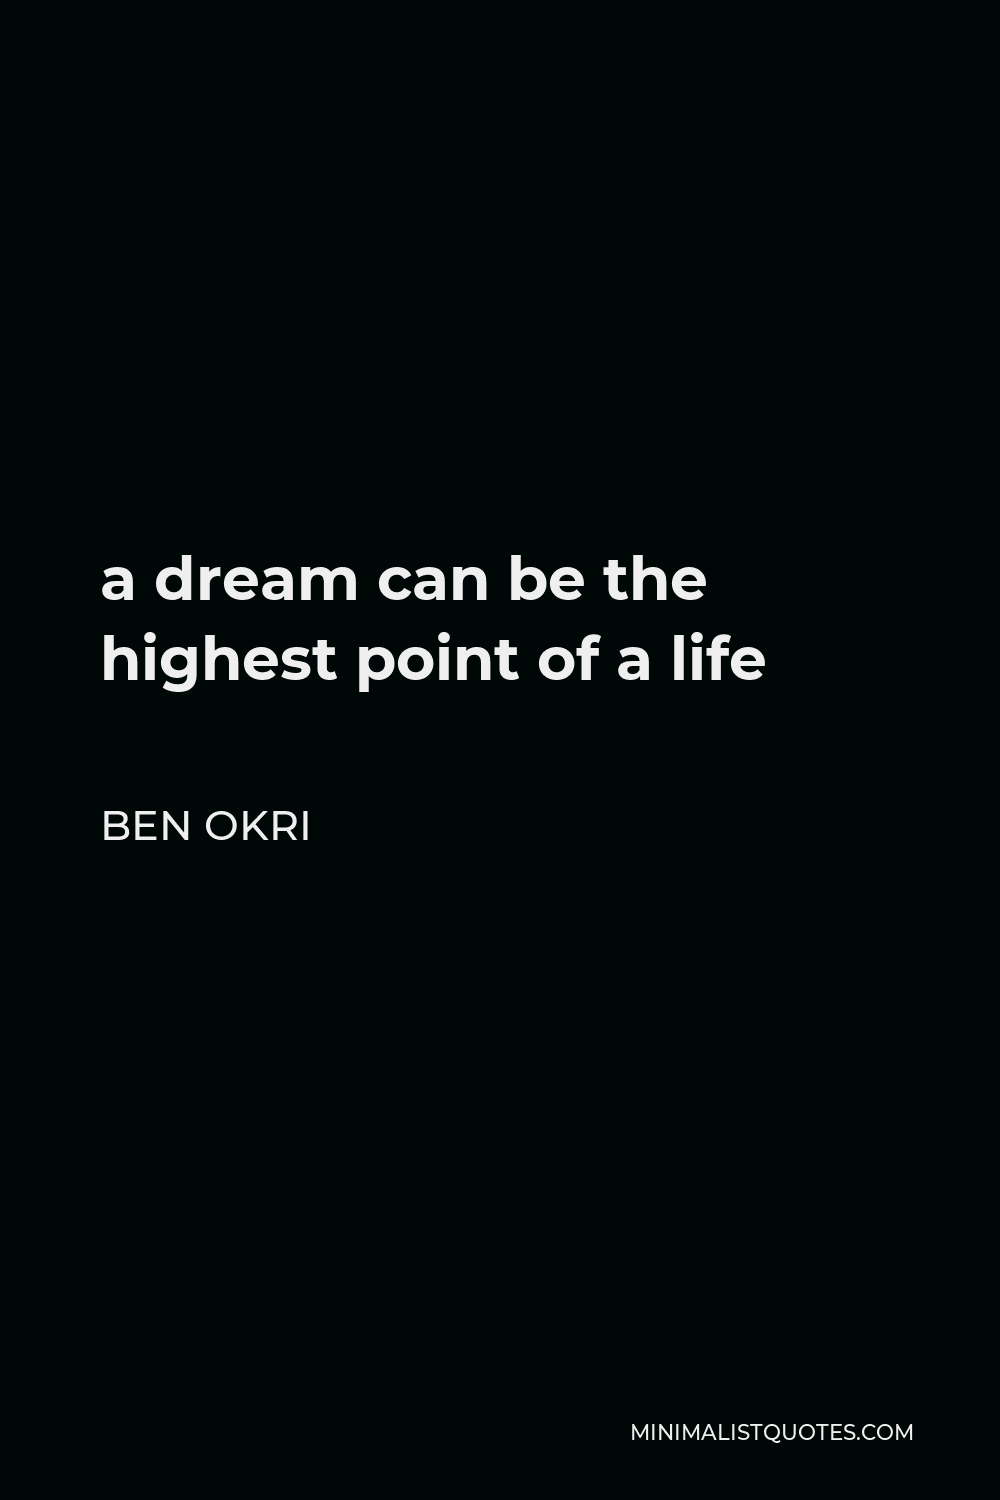 Ben Okri Quote - a dream can be the highest point of a life